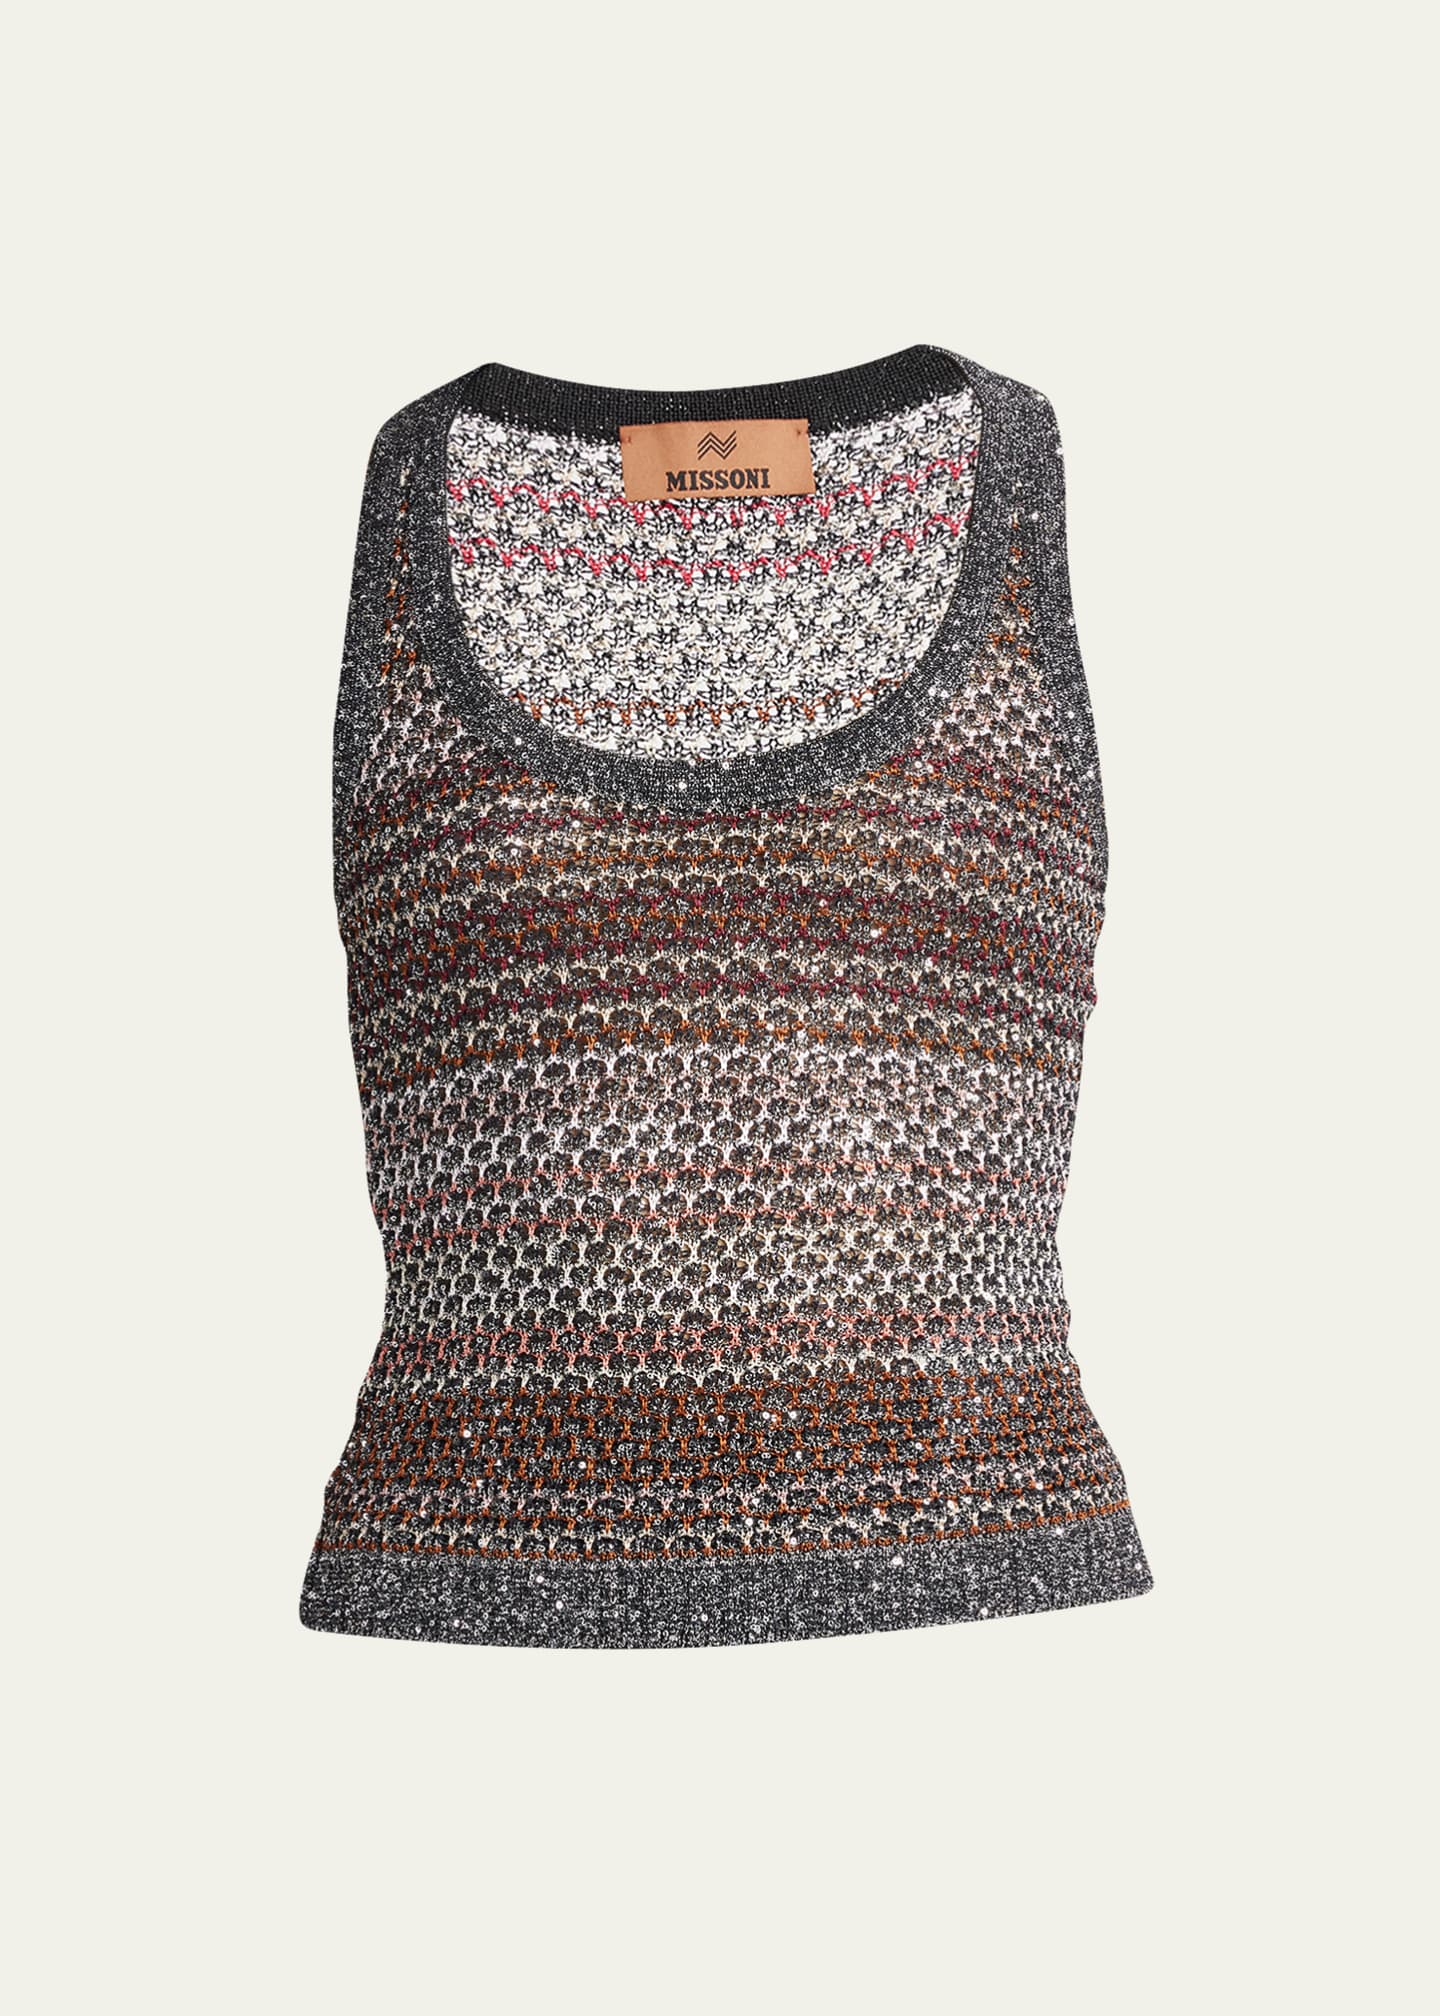 Missoni Multicolor Mesh Knit Tank Top with Sequins - Bergdorf Goodman